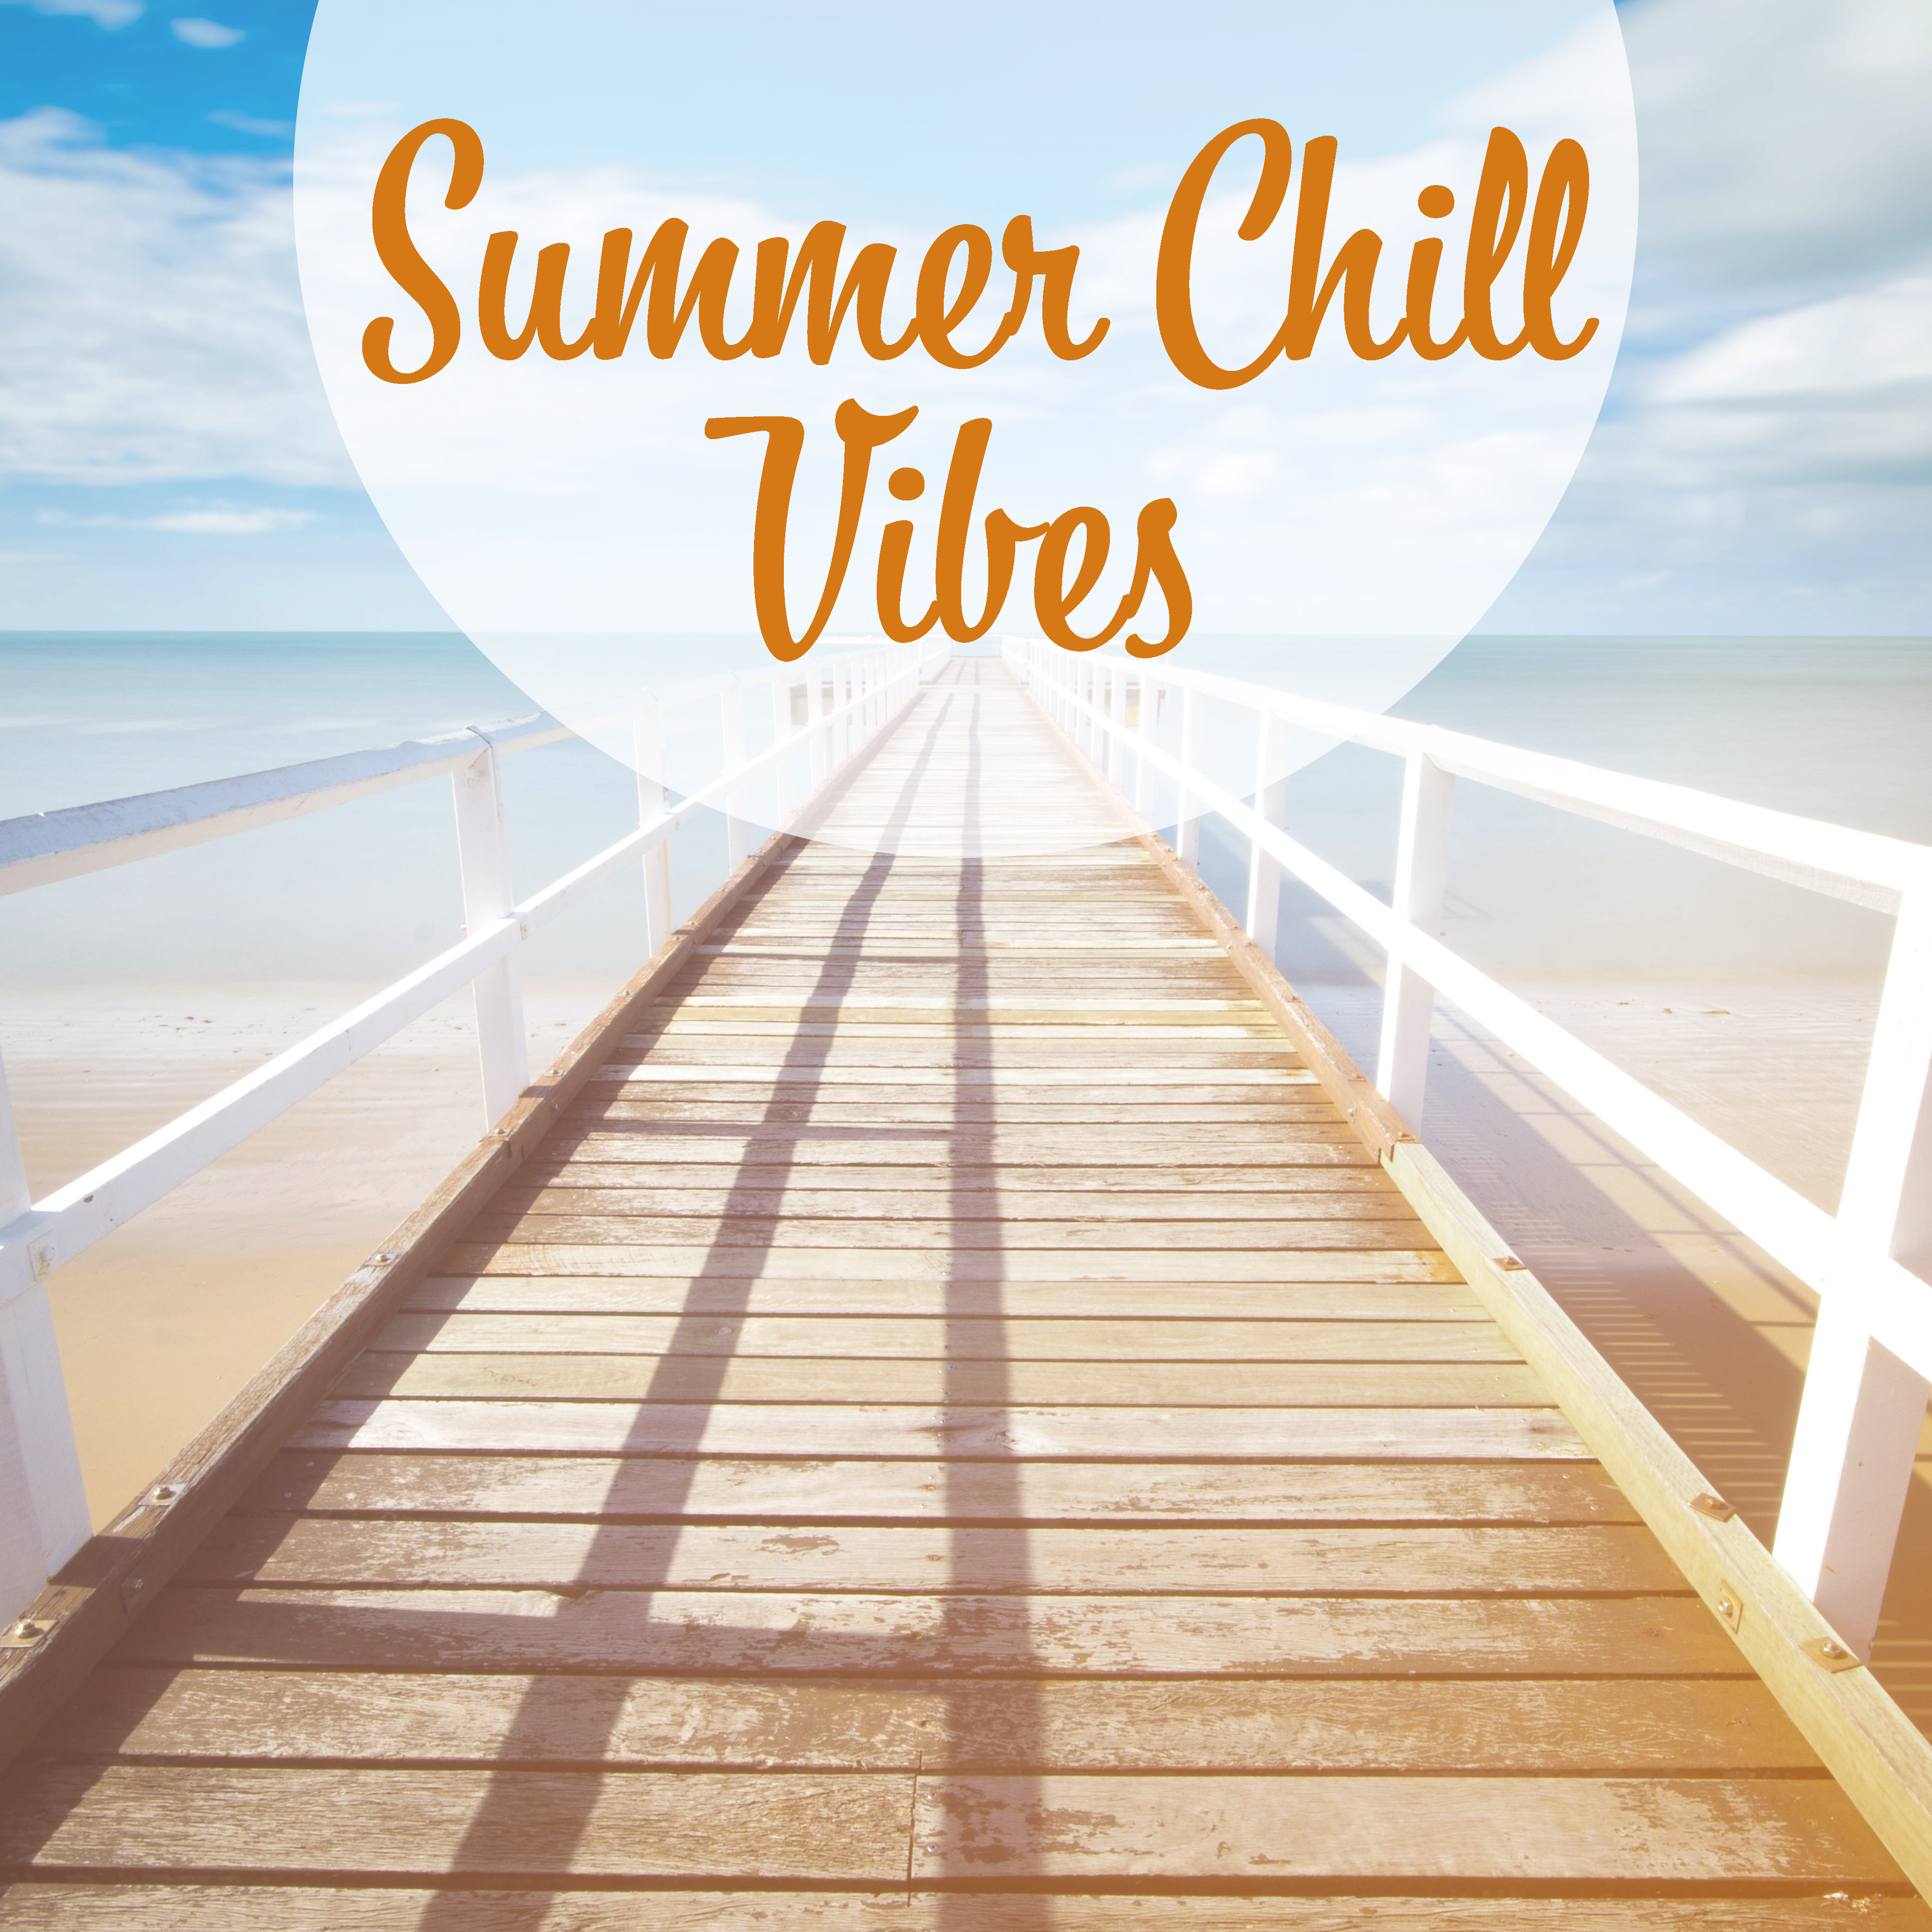 Summer Chill Vibes  Easy Listening, Time to Relax, Peaceful Ibiza